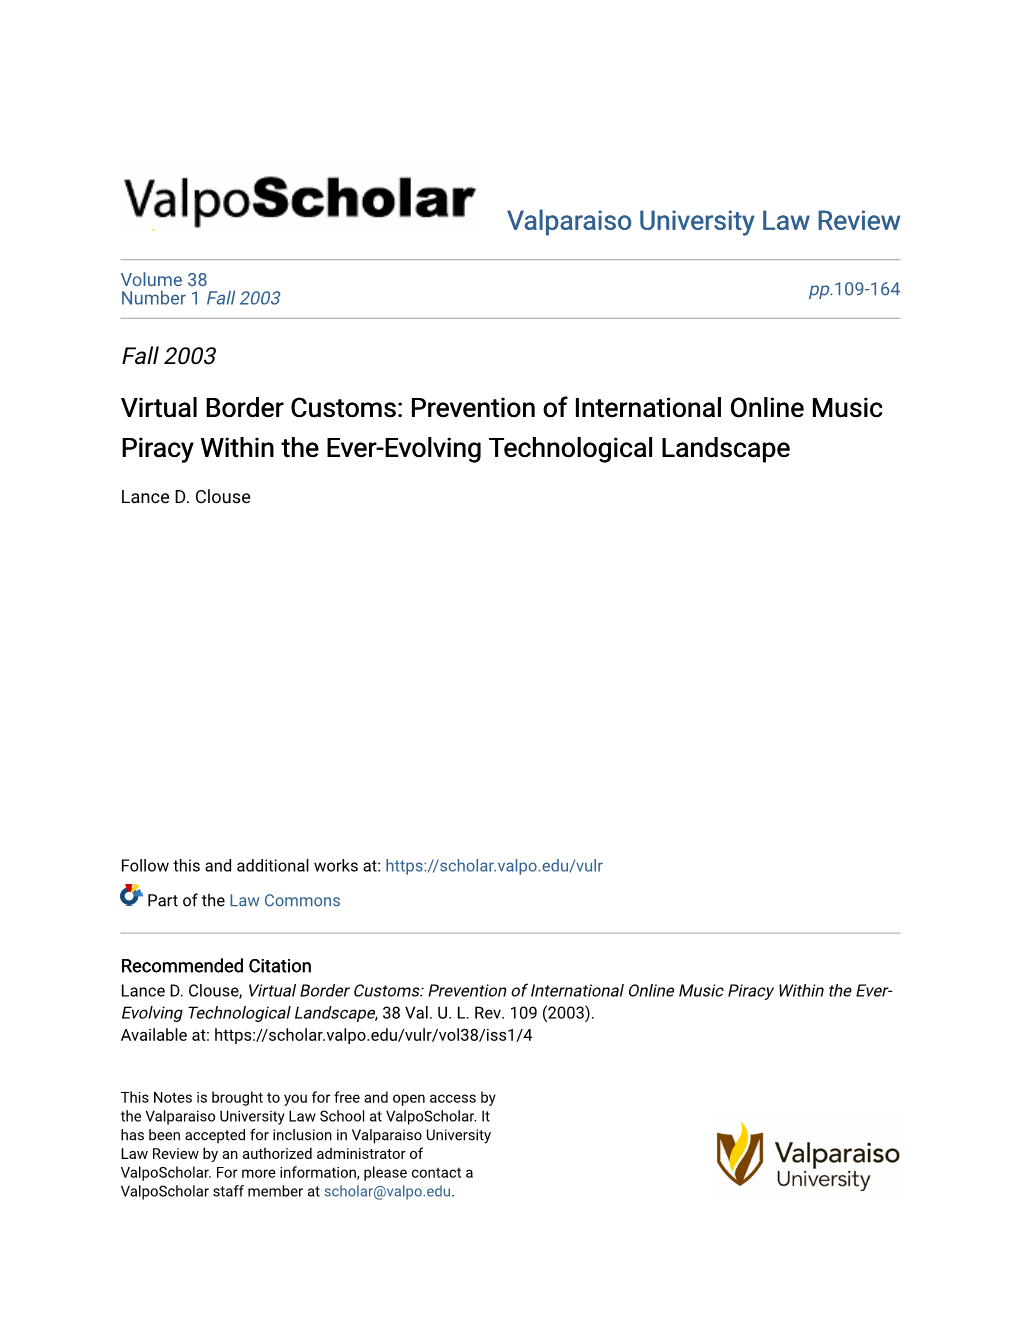 Virtual Border Customs: Prevention of International Online Music Piracy Within the Ever-Evolving Technological Landscape